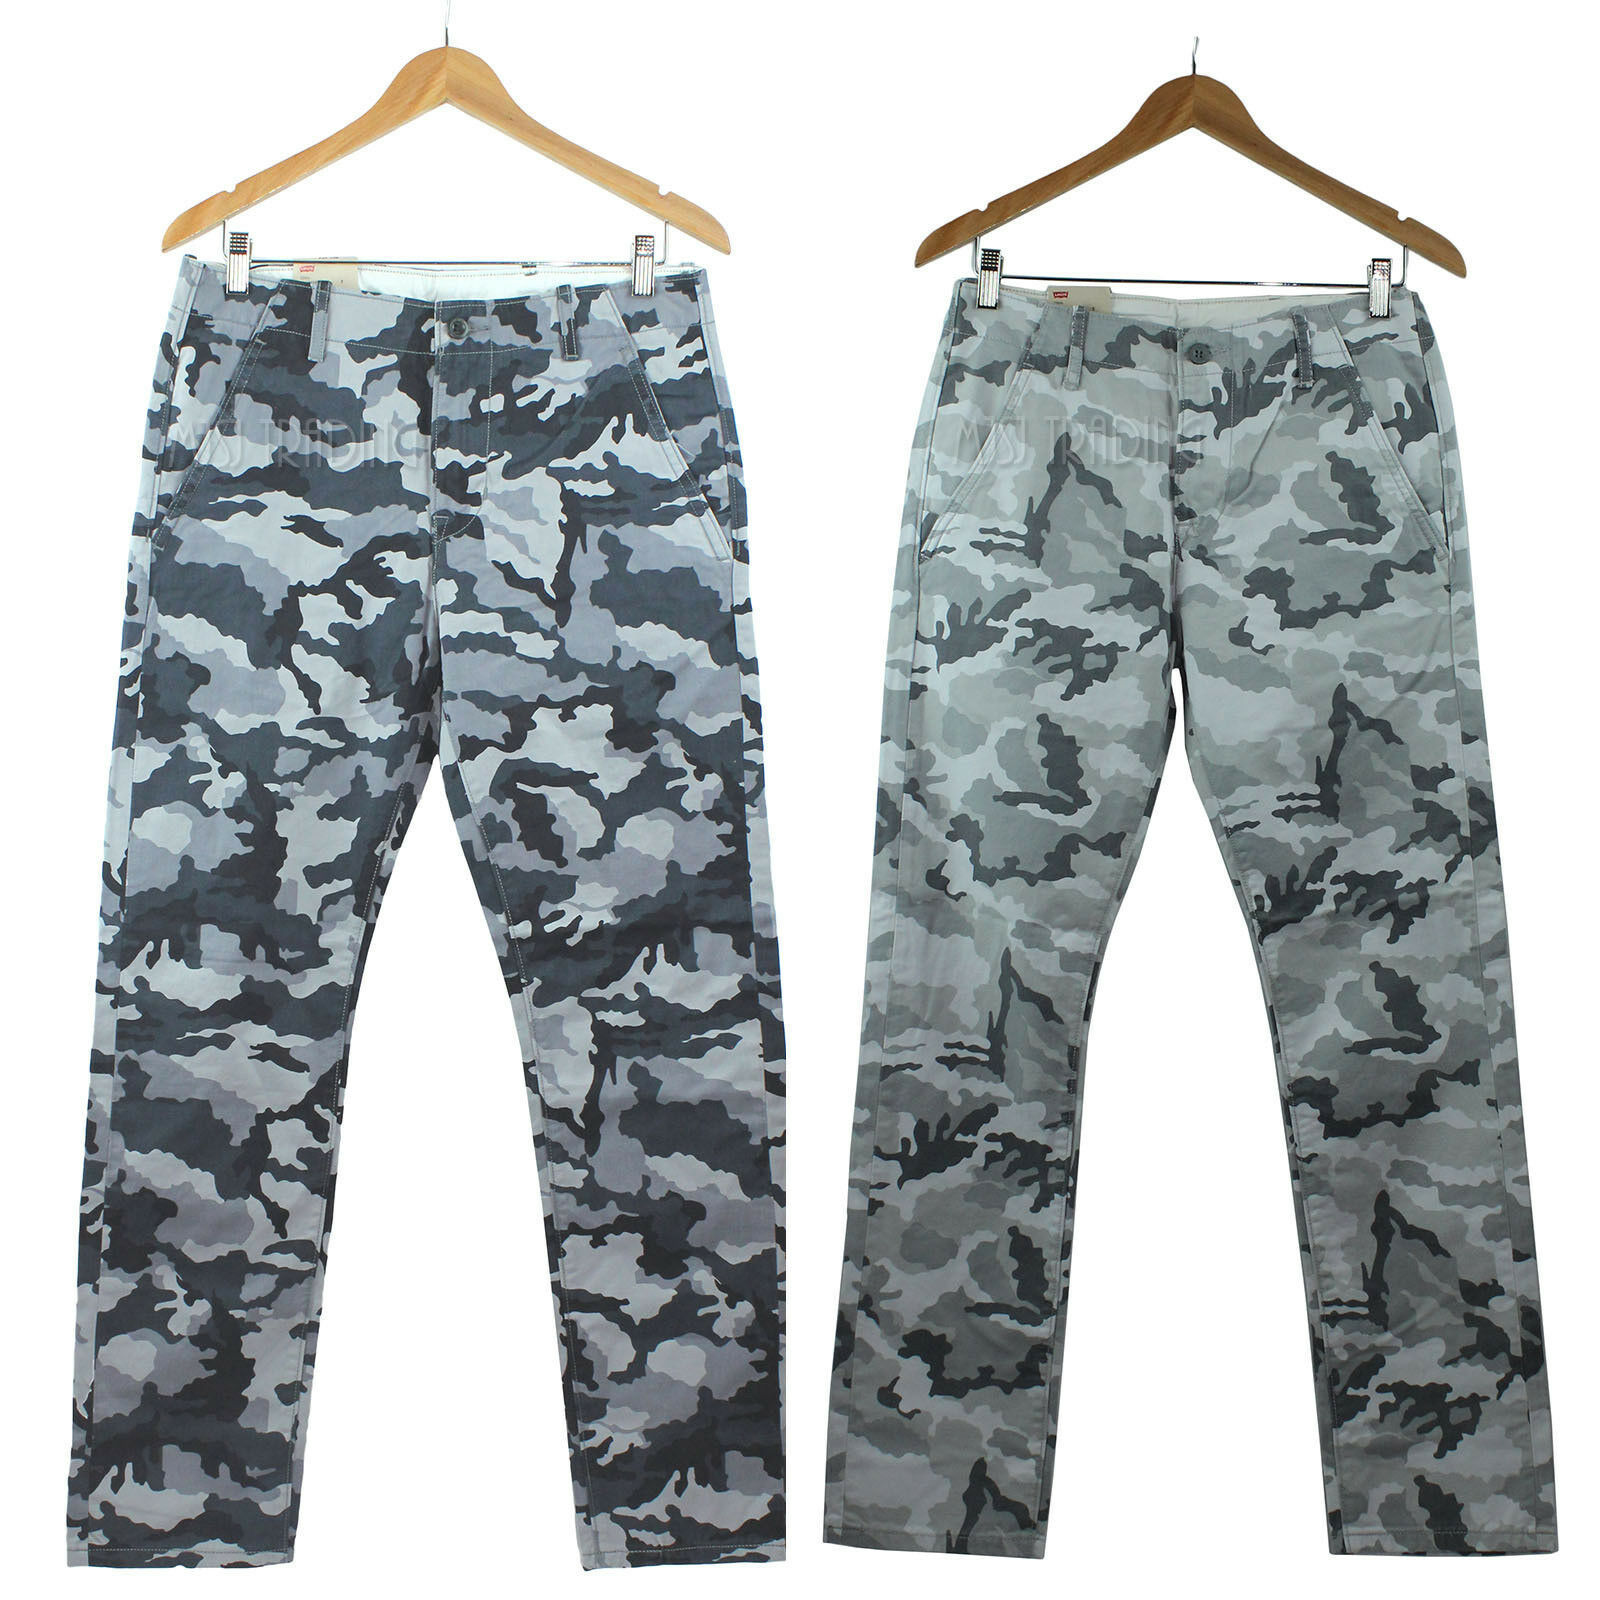 Primary image for NWT Levi's Men Chino Camo Regular Fit Twill Pants 100% Cotton LEVIS Gray/ Black